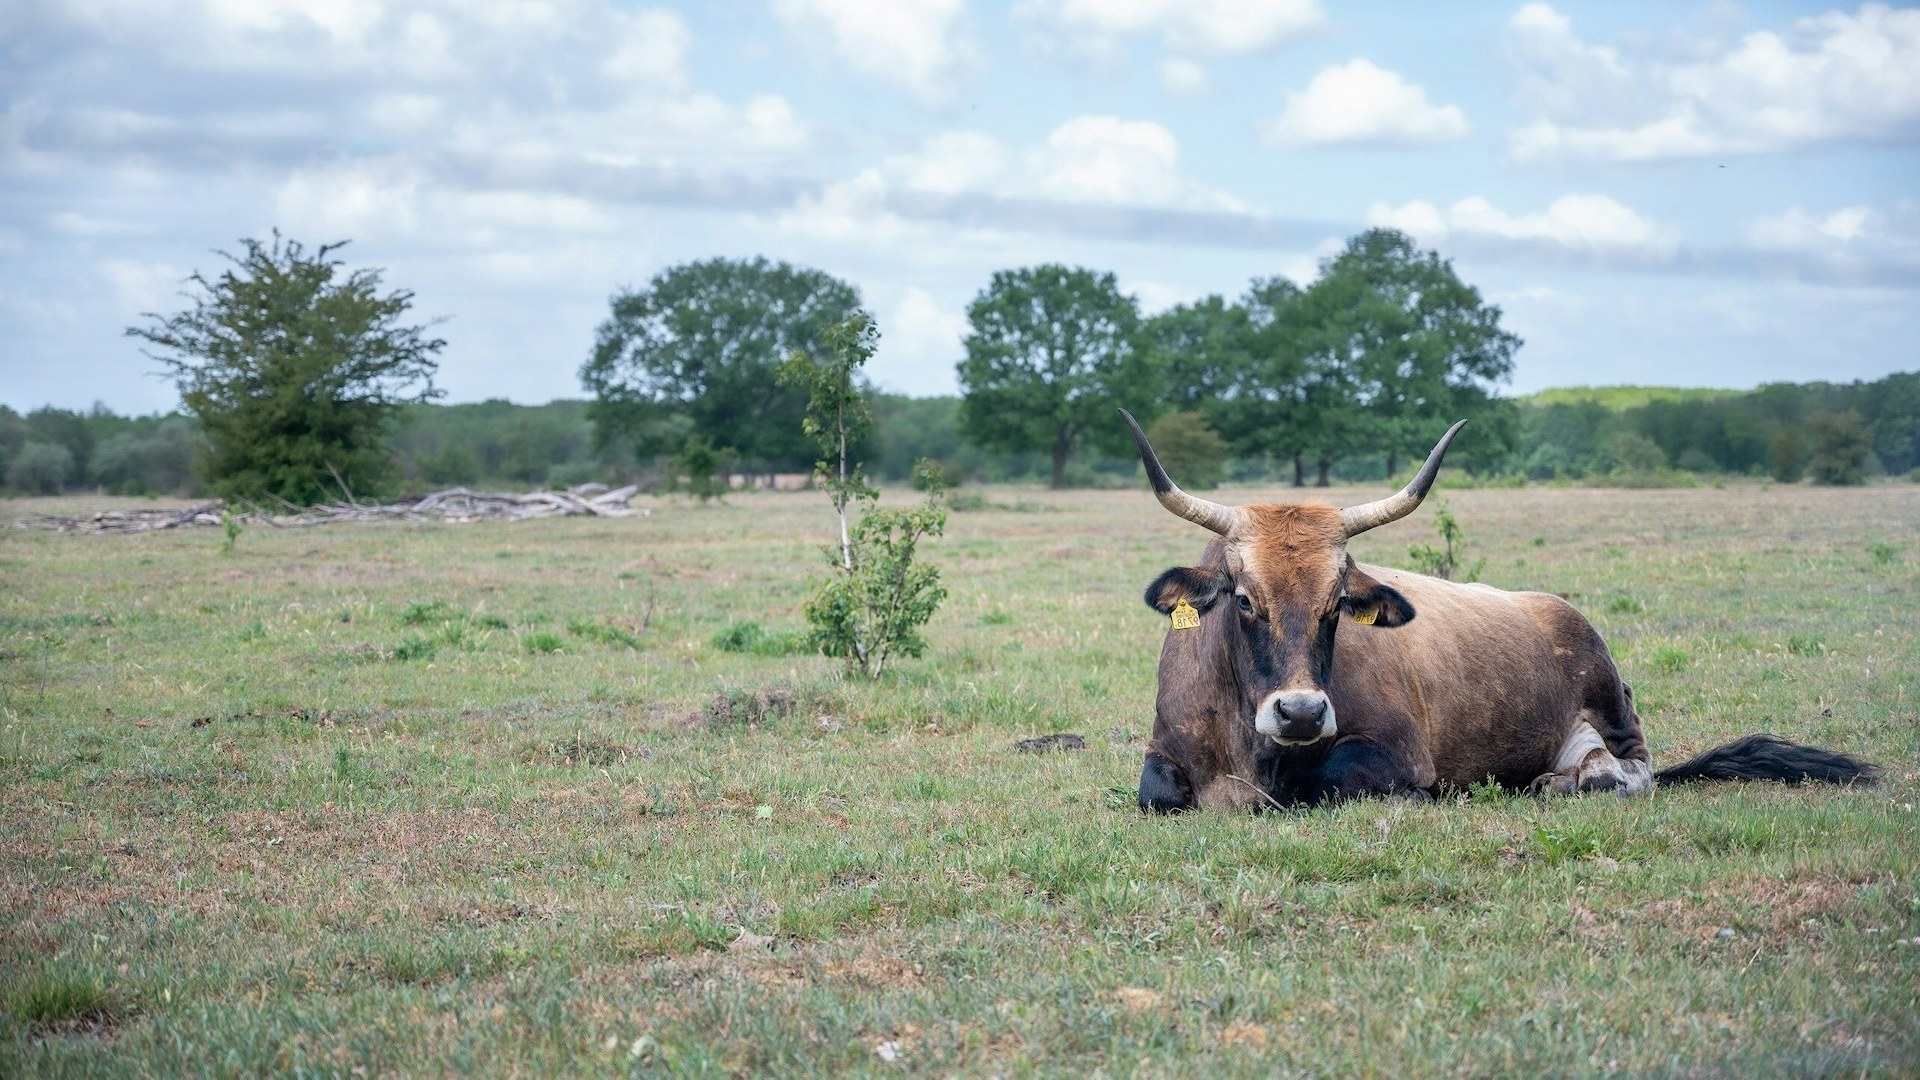 Tauros cow in the Maashorst, Netherlands